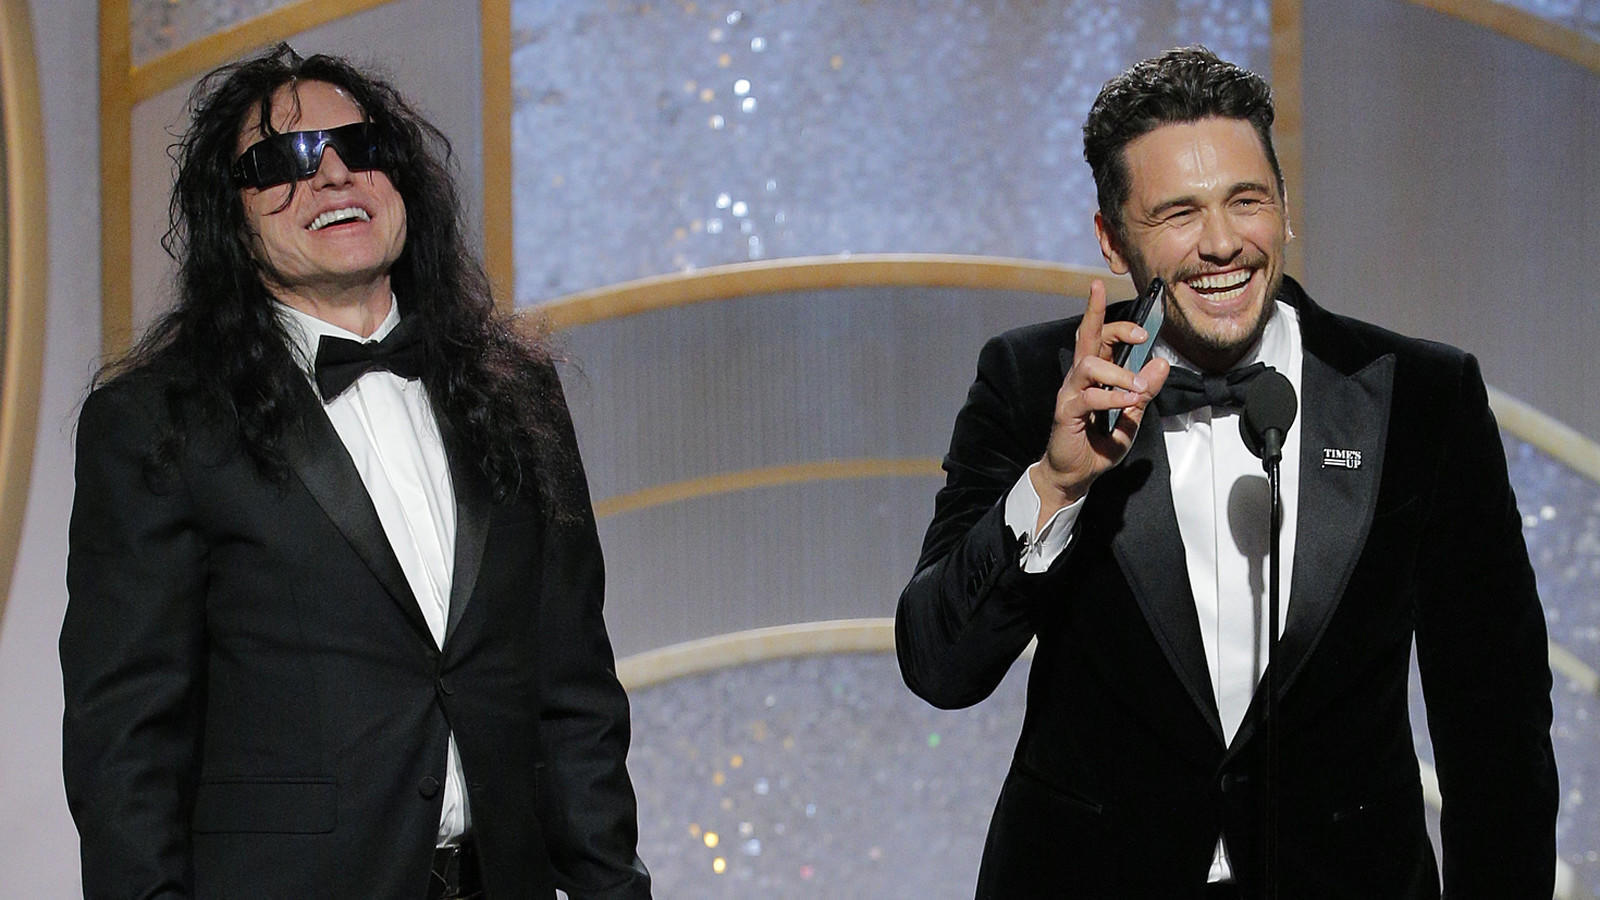 Tommy Wiseau reveals what he would have said on stage at the Golden Globes - LA Times